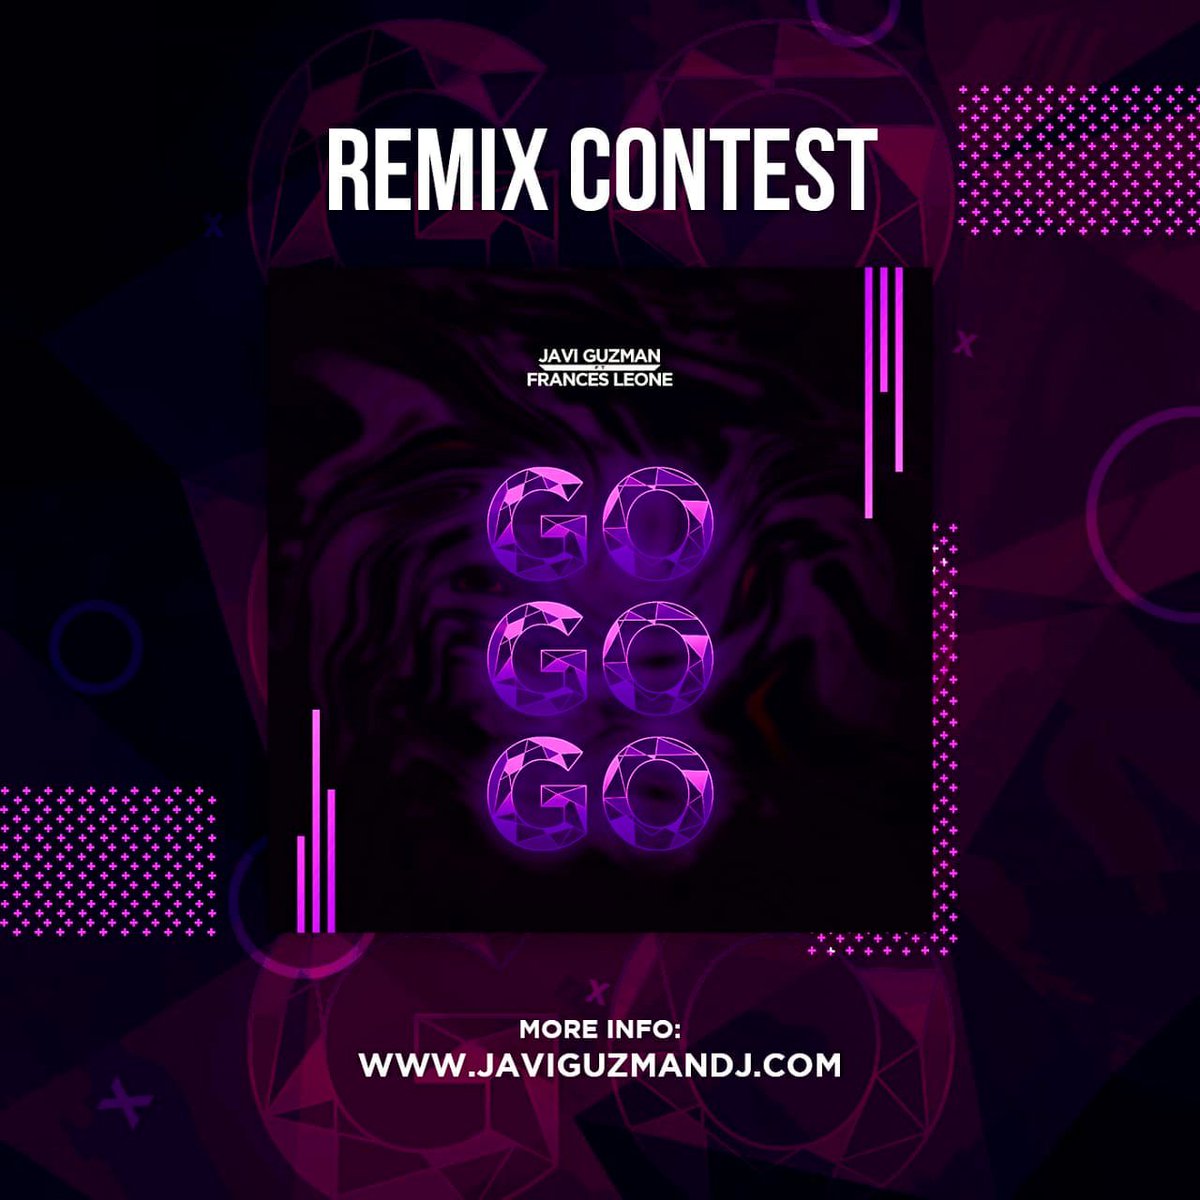 Remix contest has begun! Send your remix in; 1st and 2nd prize you win MONEYSSS
#remixcontest #remixcompetition #talentcompetition #remix